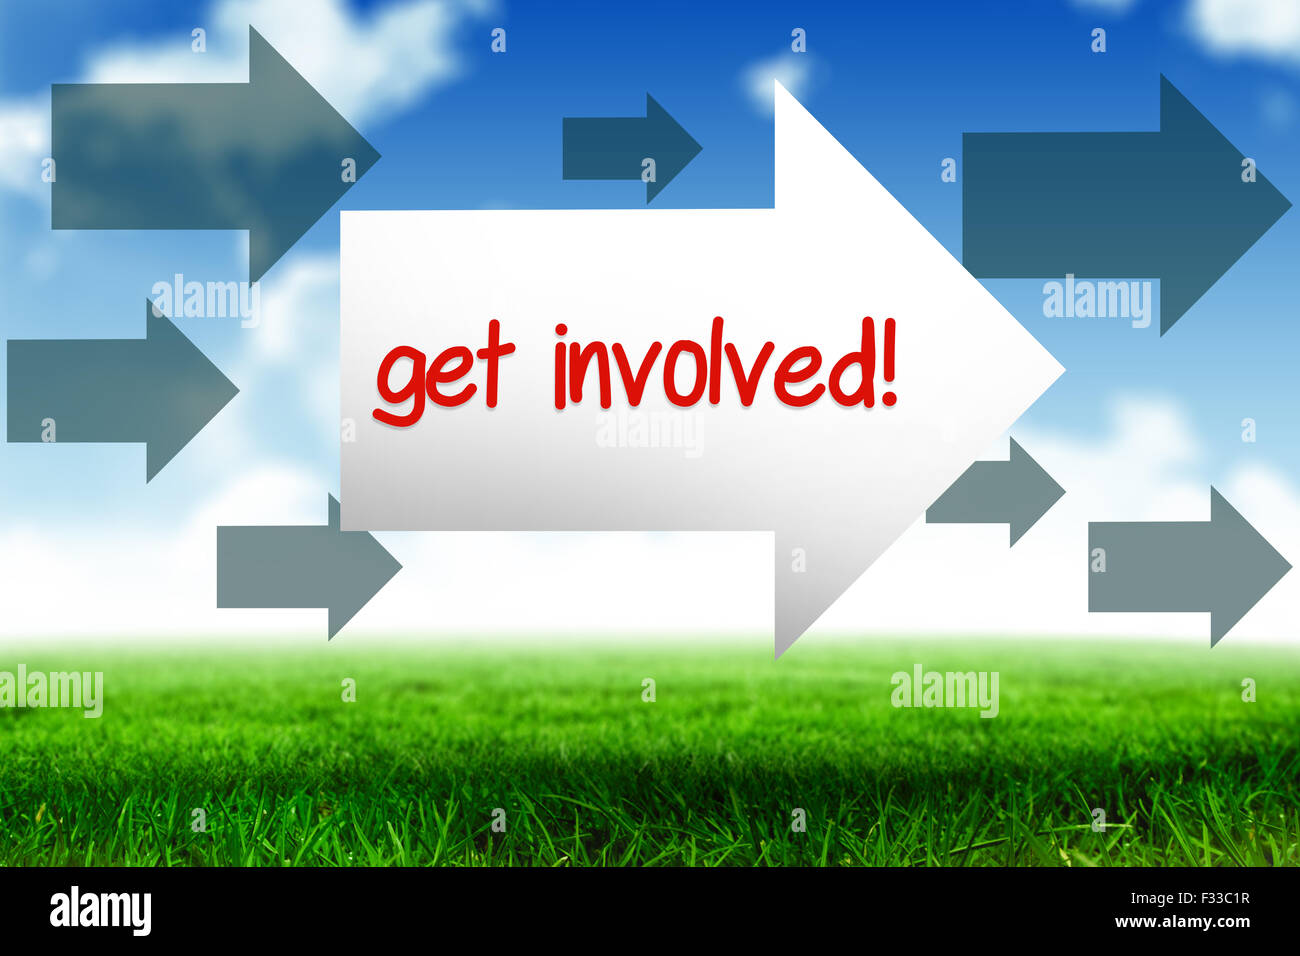 Get involved! against blue sky over green field Stock Photo